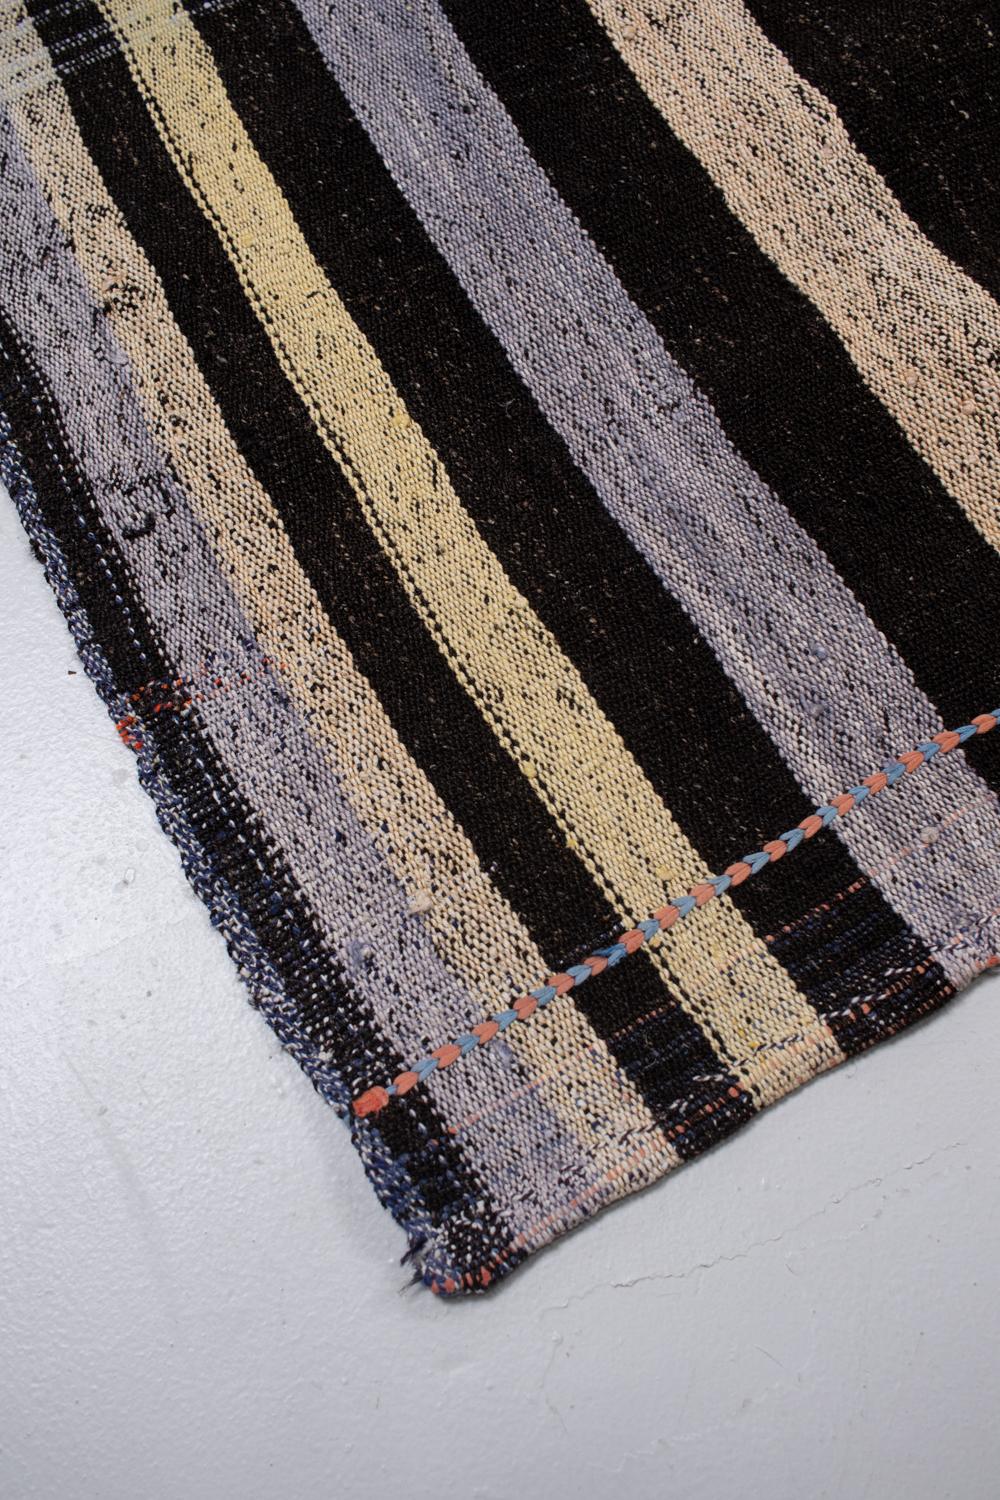 Vintage Turkish Flatweave Kilim Rug In Good Condition For Sale In West Palm Beach, FL